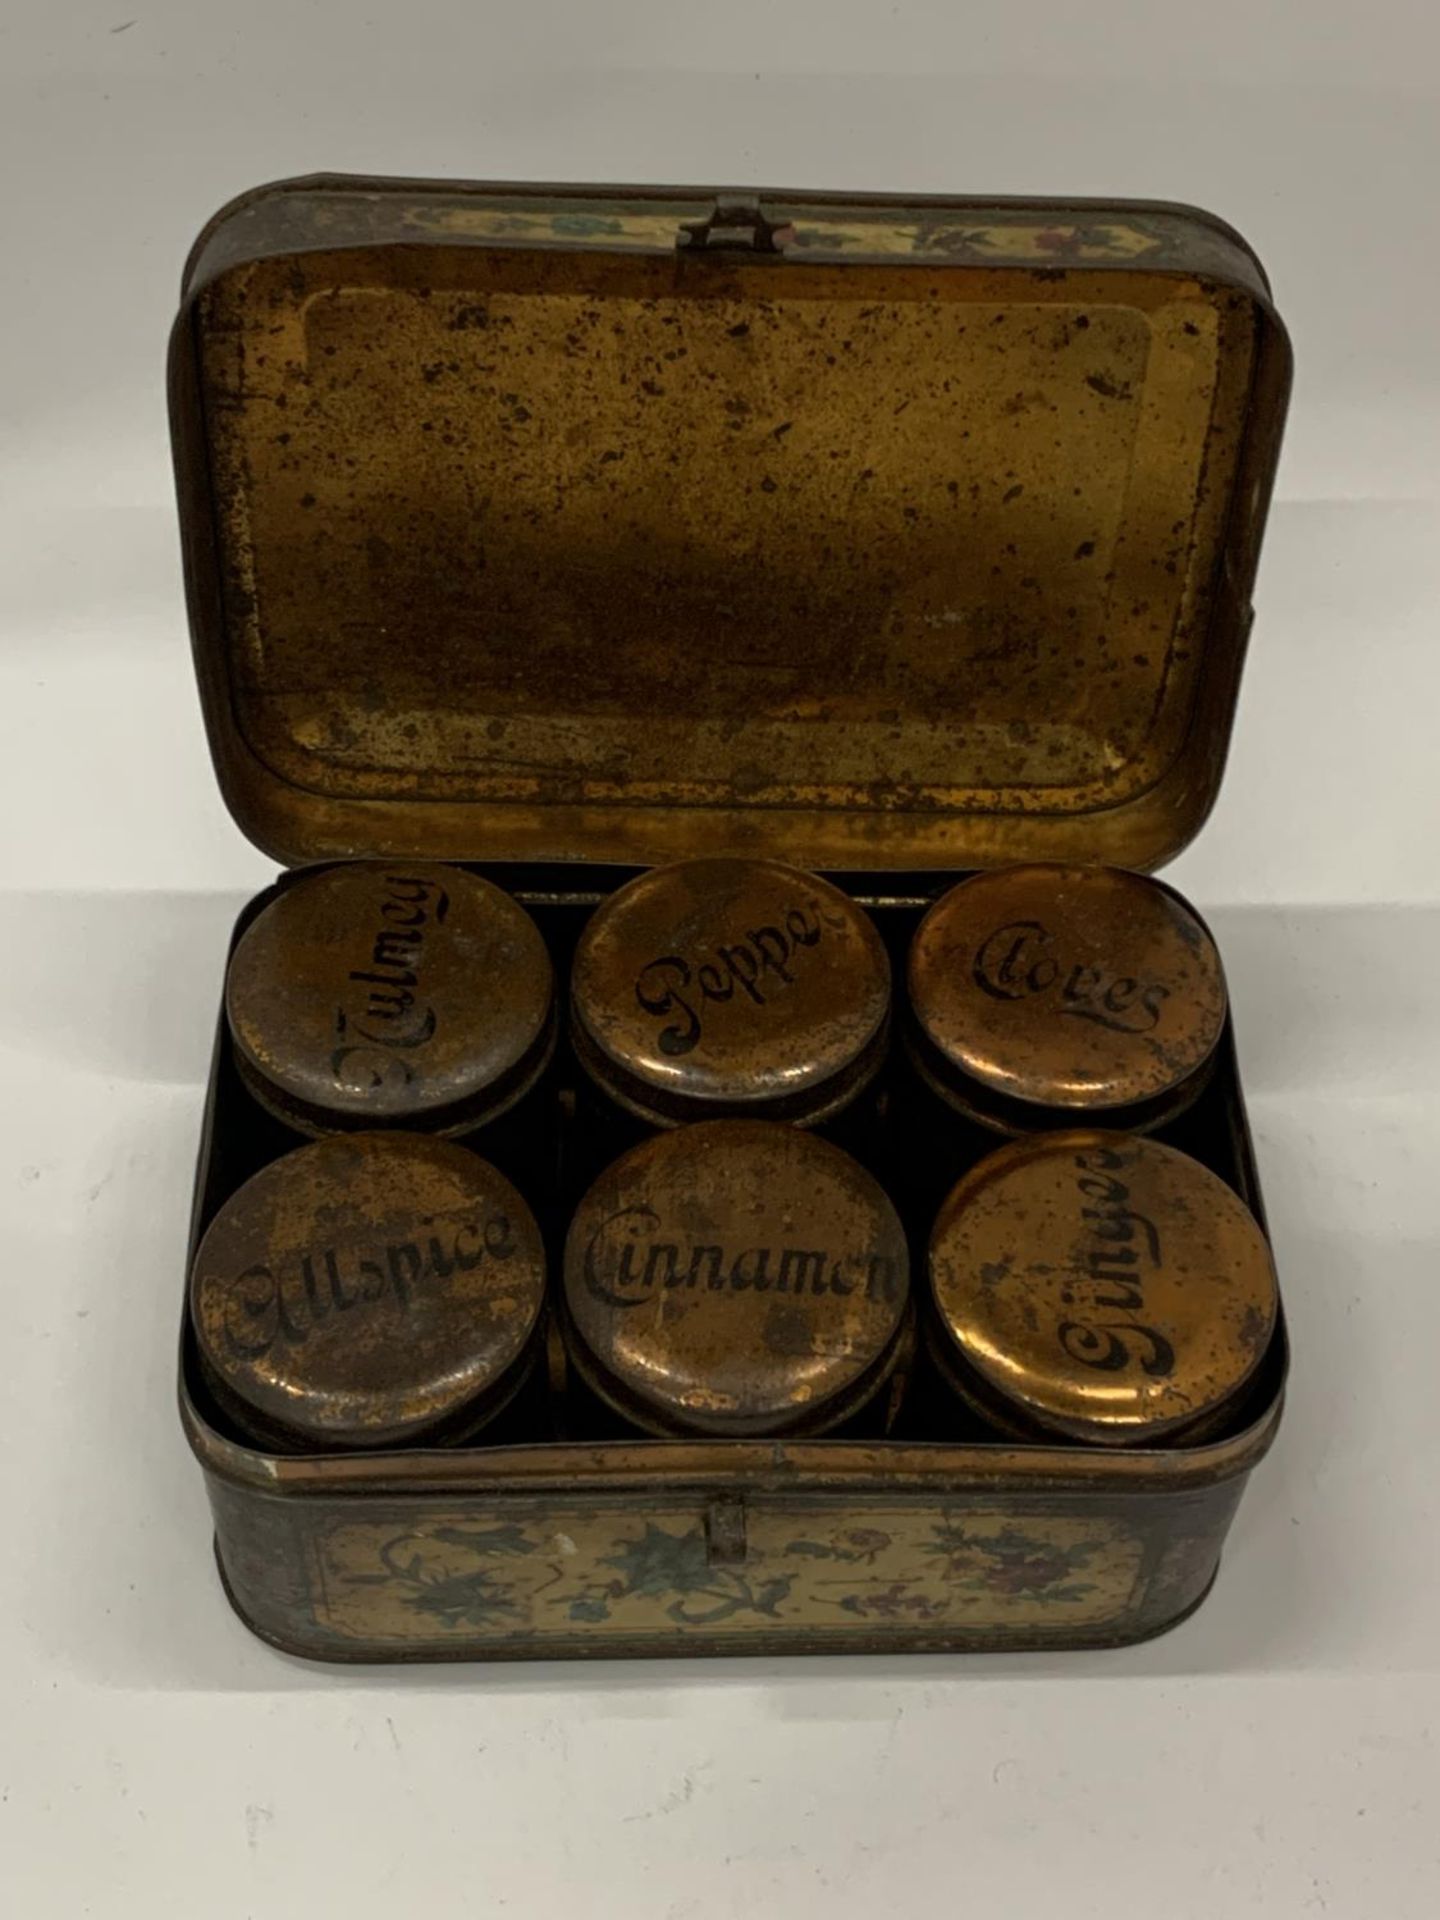 A VINTAGE 1940'S TIN METAL SPICE CHEST WITH SIX INNER LIDDED SPICE CONTAINERS - Image 2 of 6